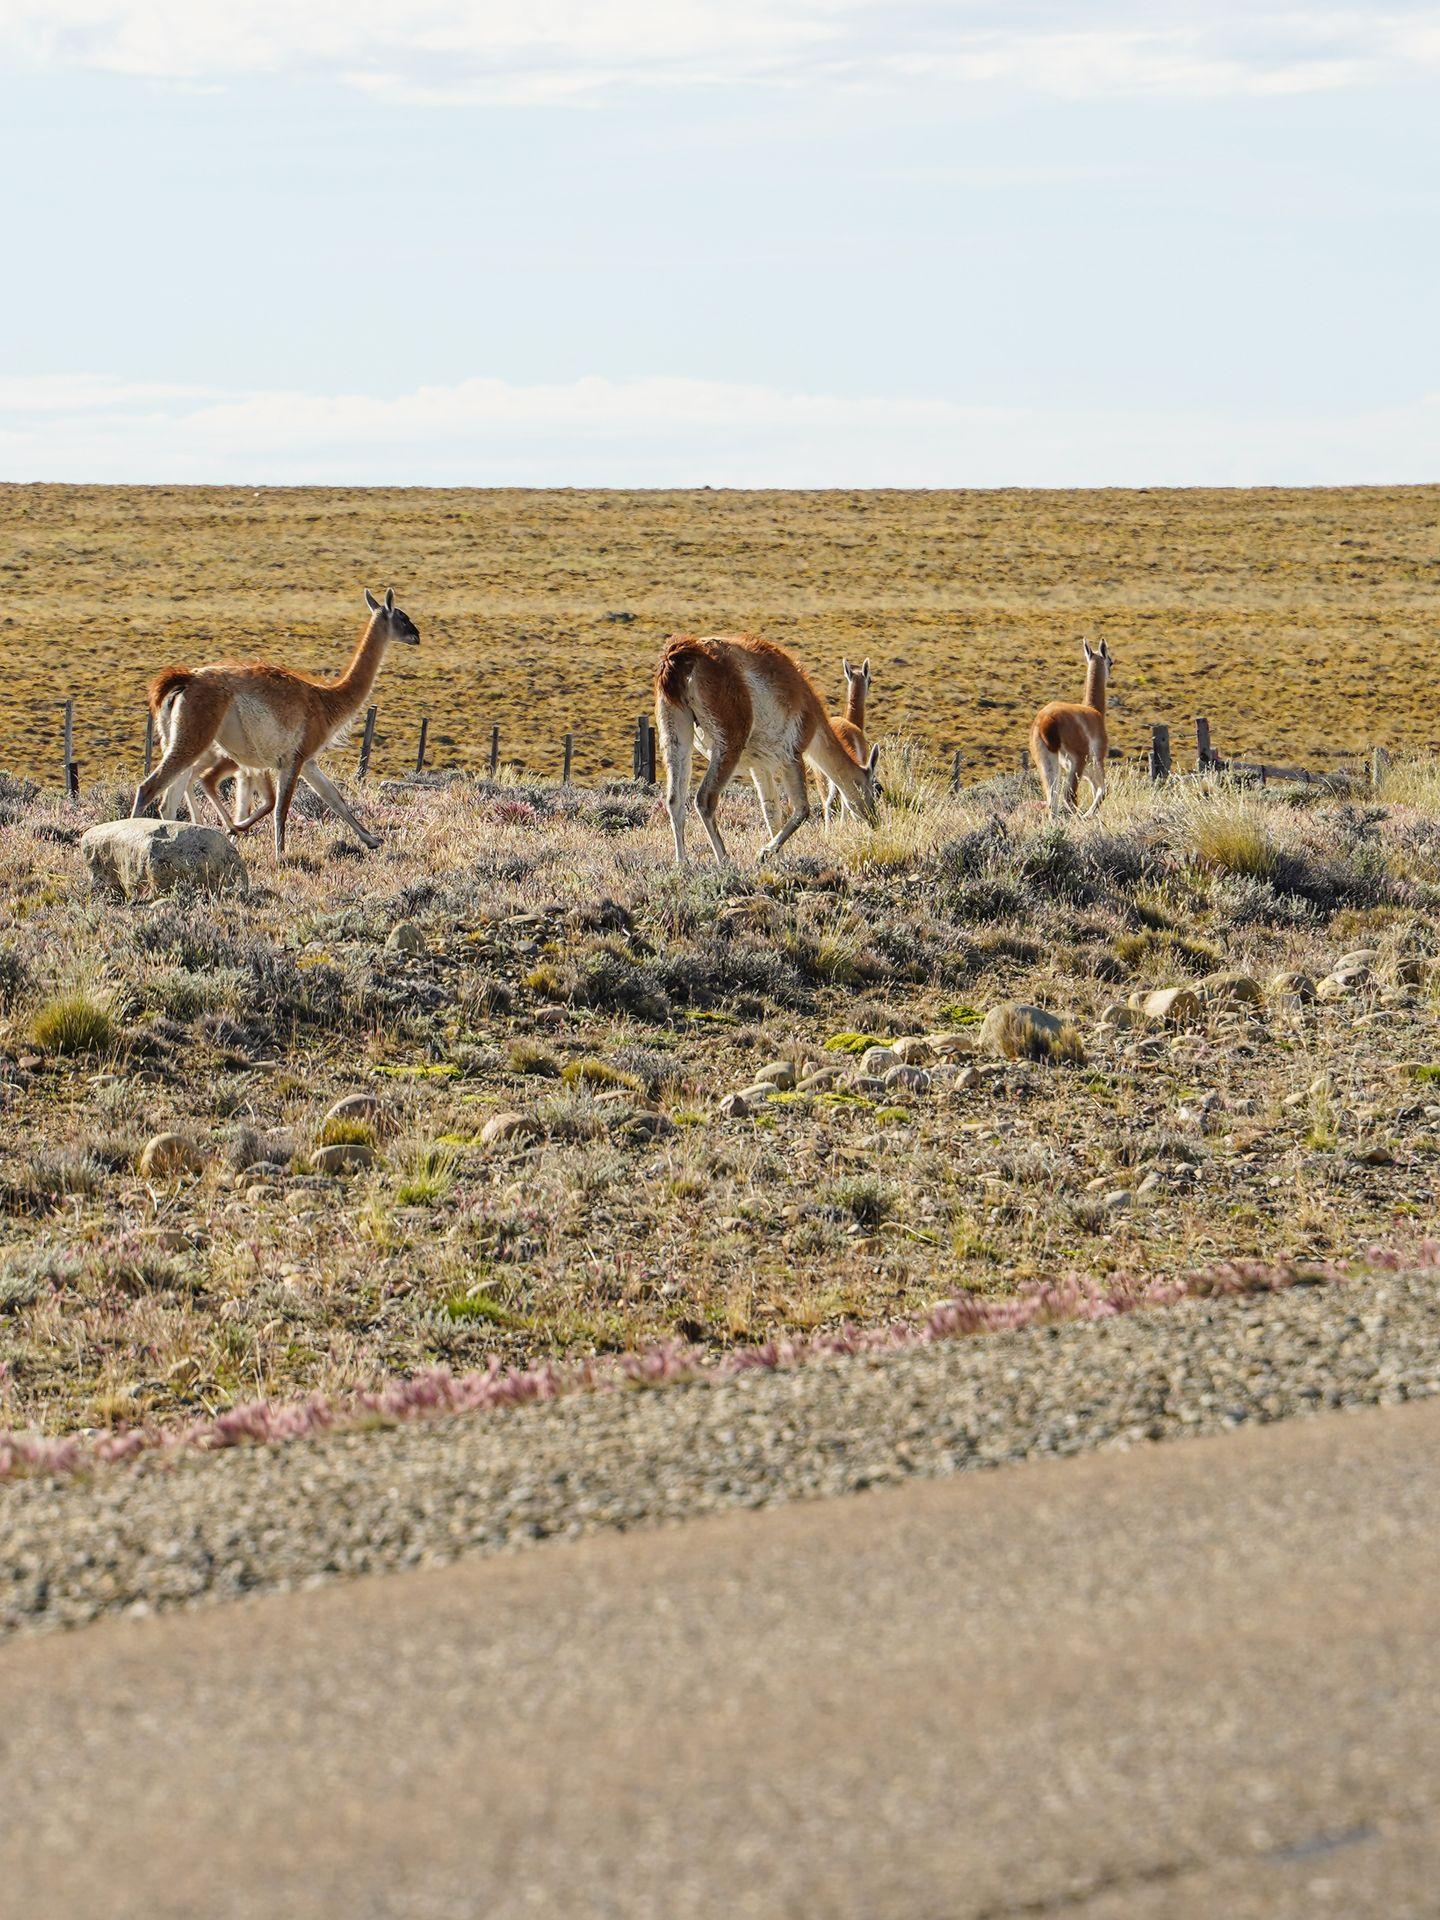 Several guanacos along the road in Patagonia.